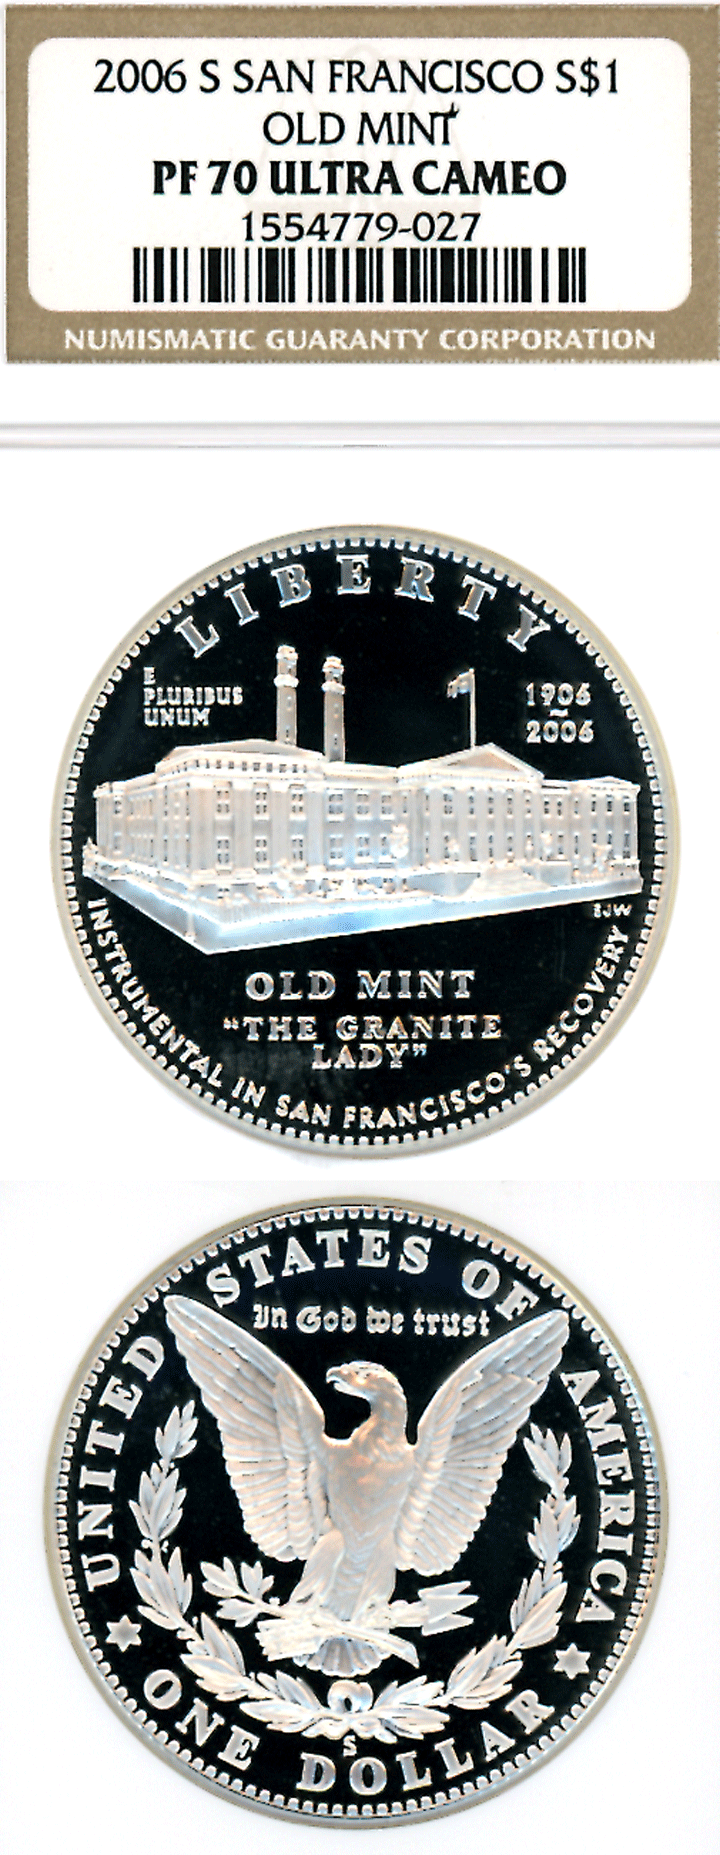 2006-S San Francisco Old Mint $ NGC PROOF-70 ULTRA CAMEO